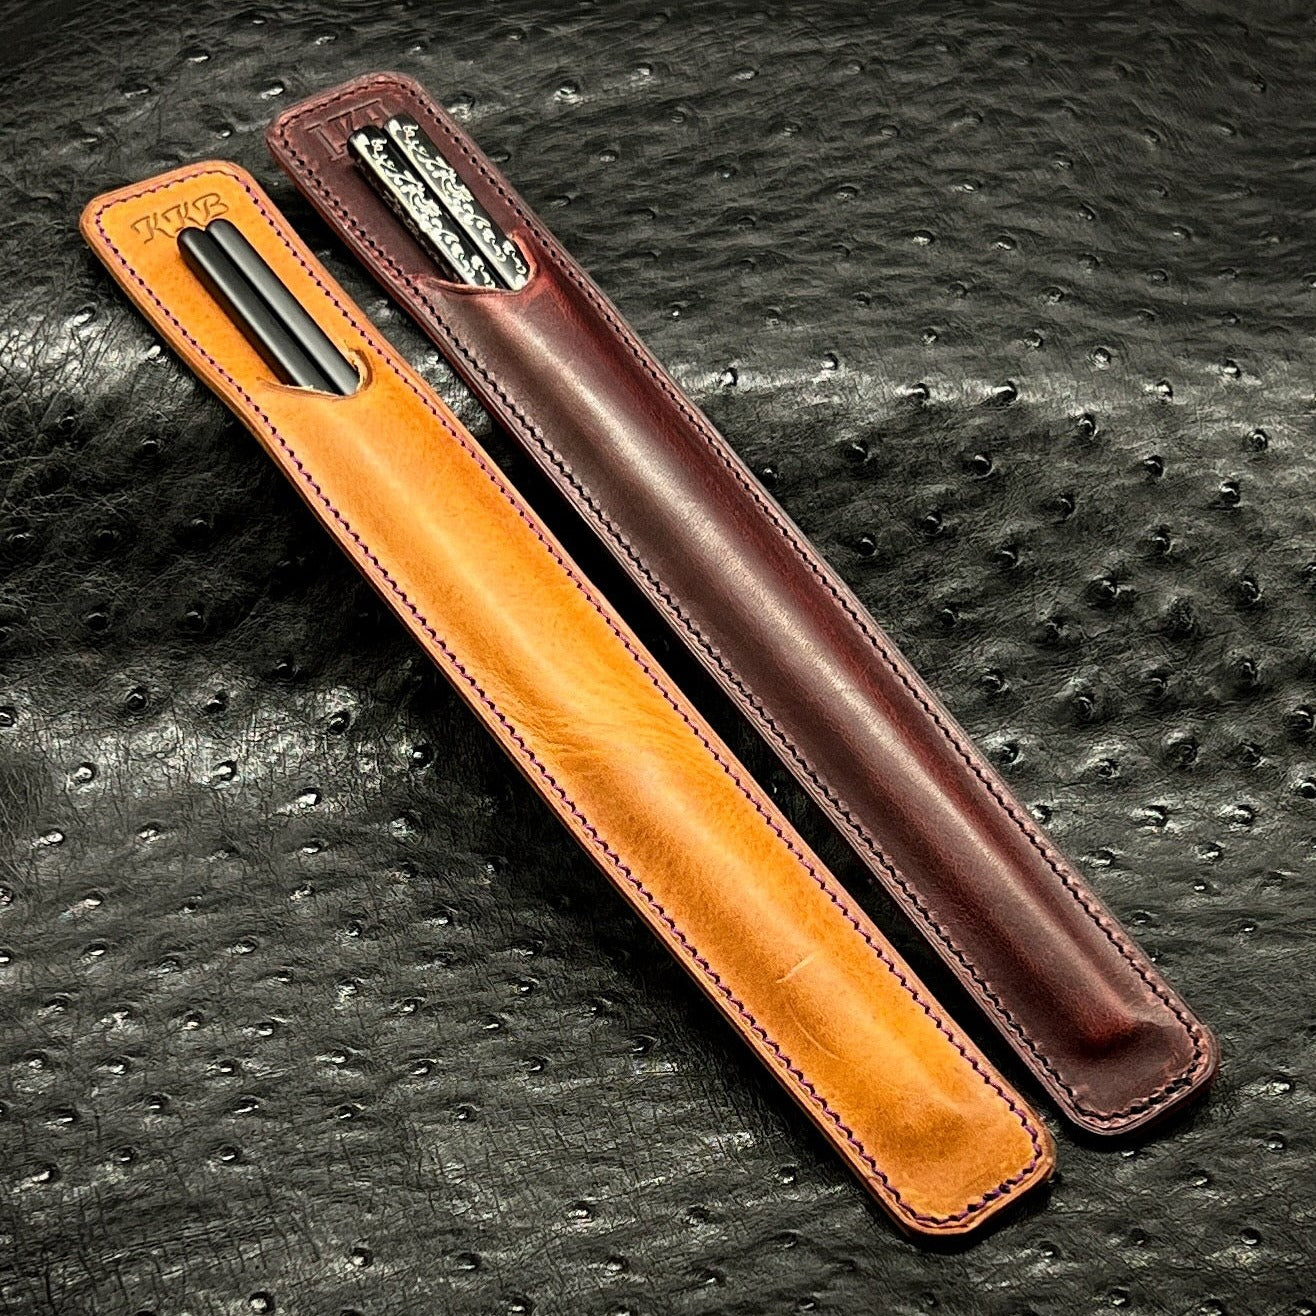 Luxury Chopsticks Case in Premium Horween Leather with Stainliness Steel Chopsticks | handmade by Custom Leather and Pen